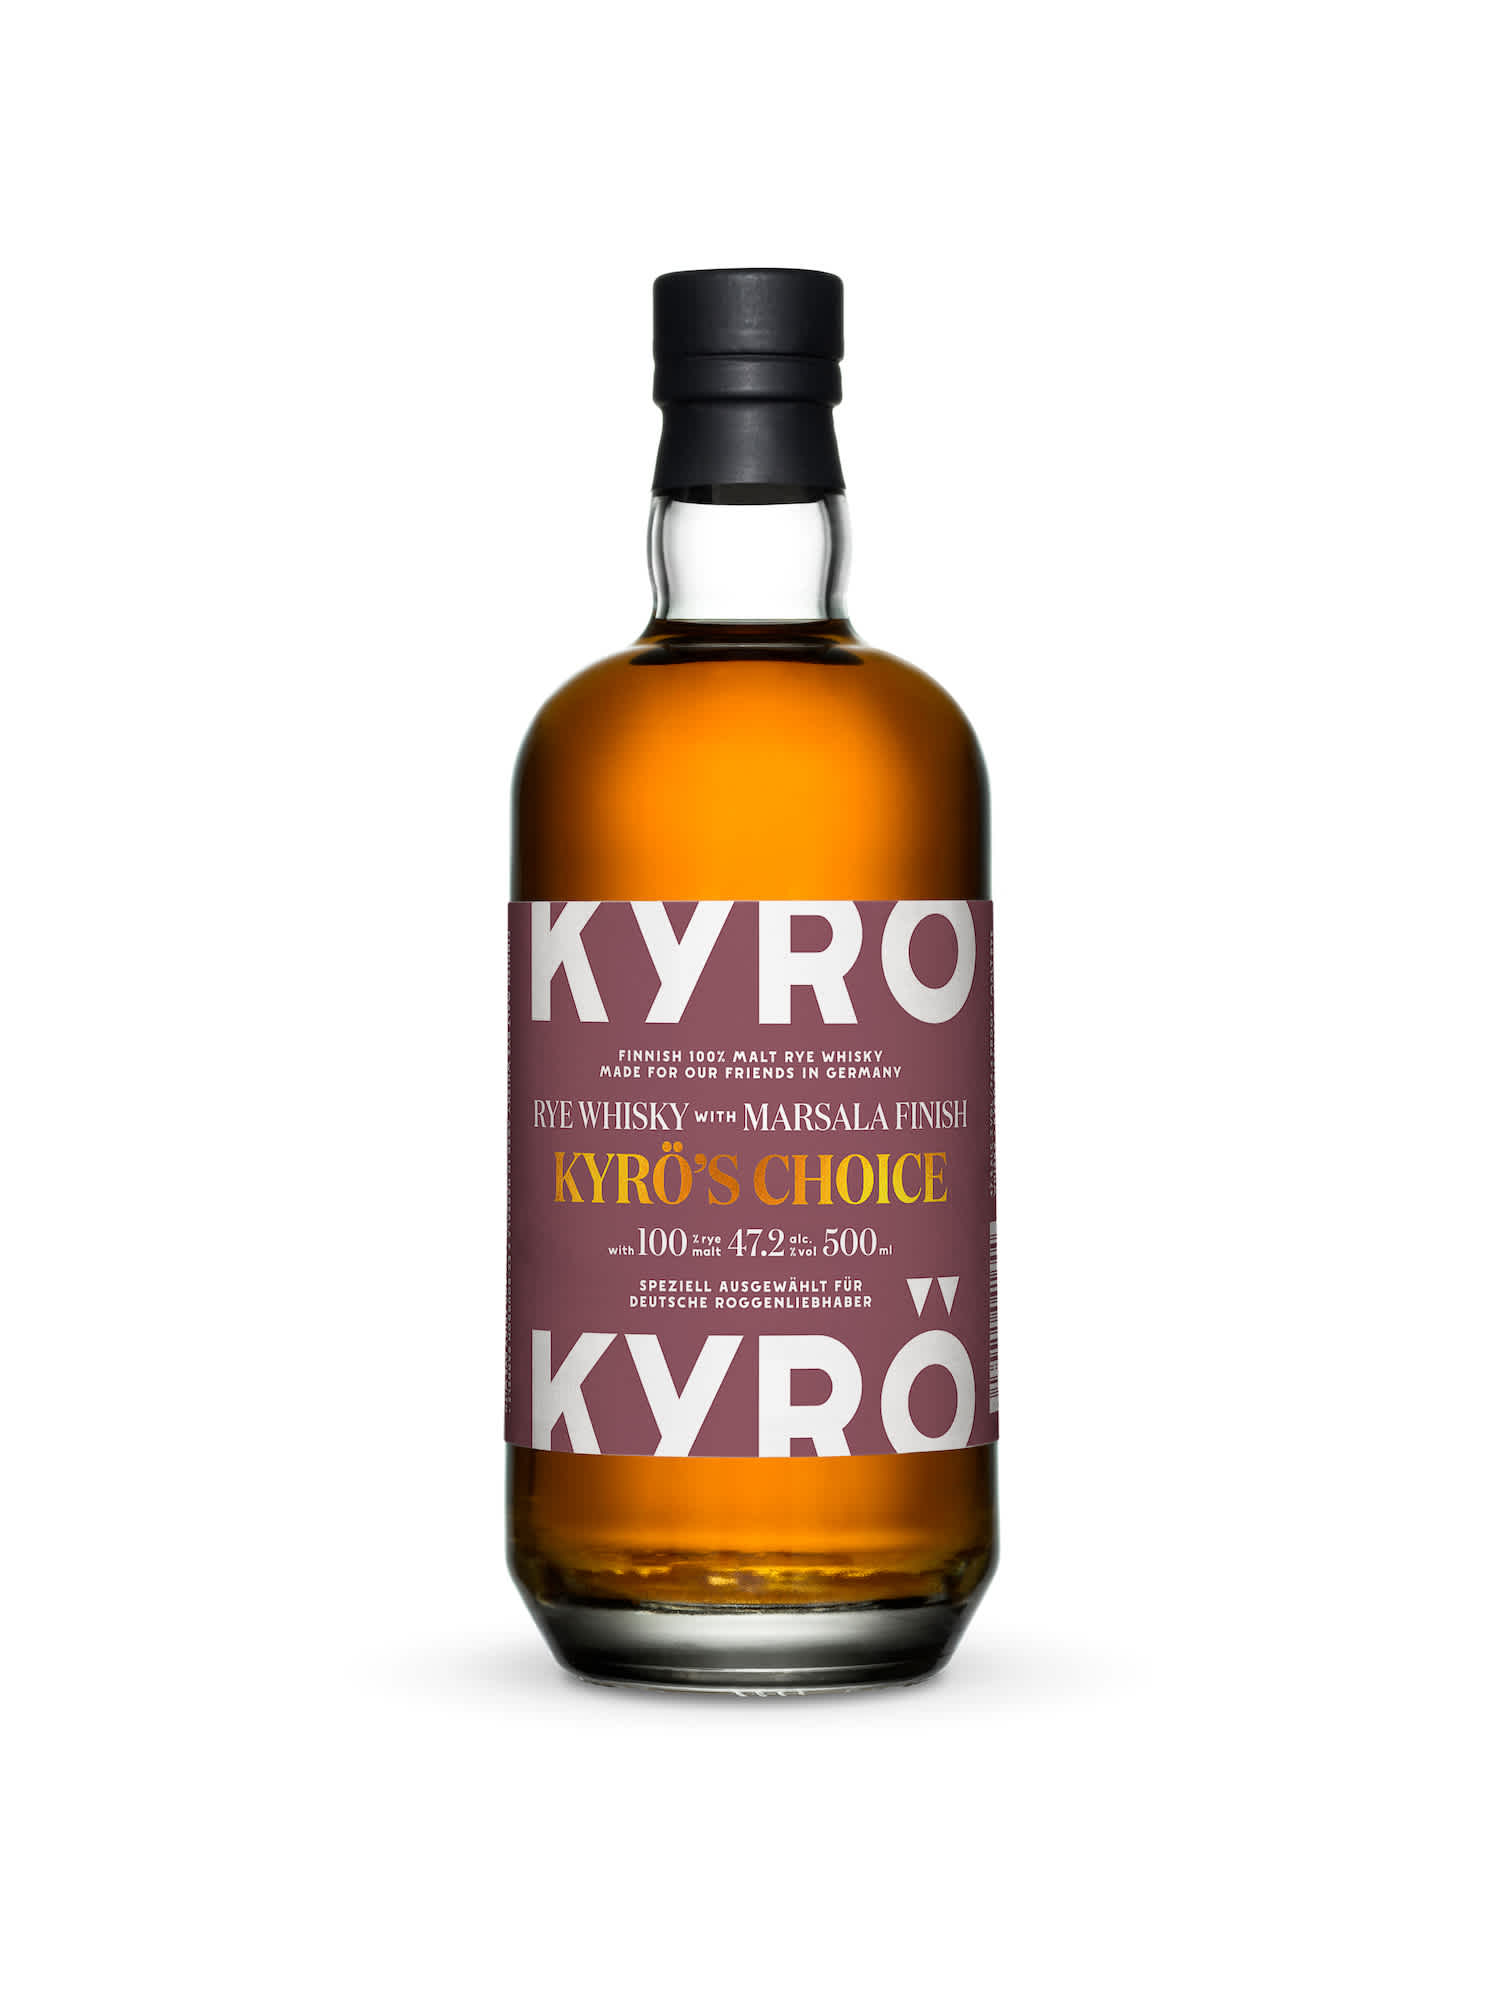 Picture of Kyrö’s Choice (2021/02) : Rye Whisky with Marsala Finish 500 ml bottle. 